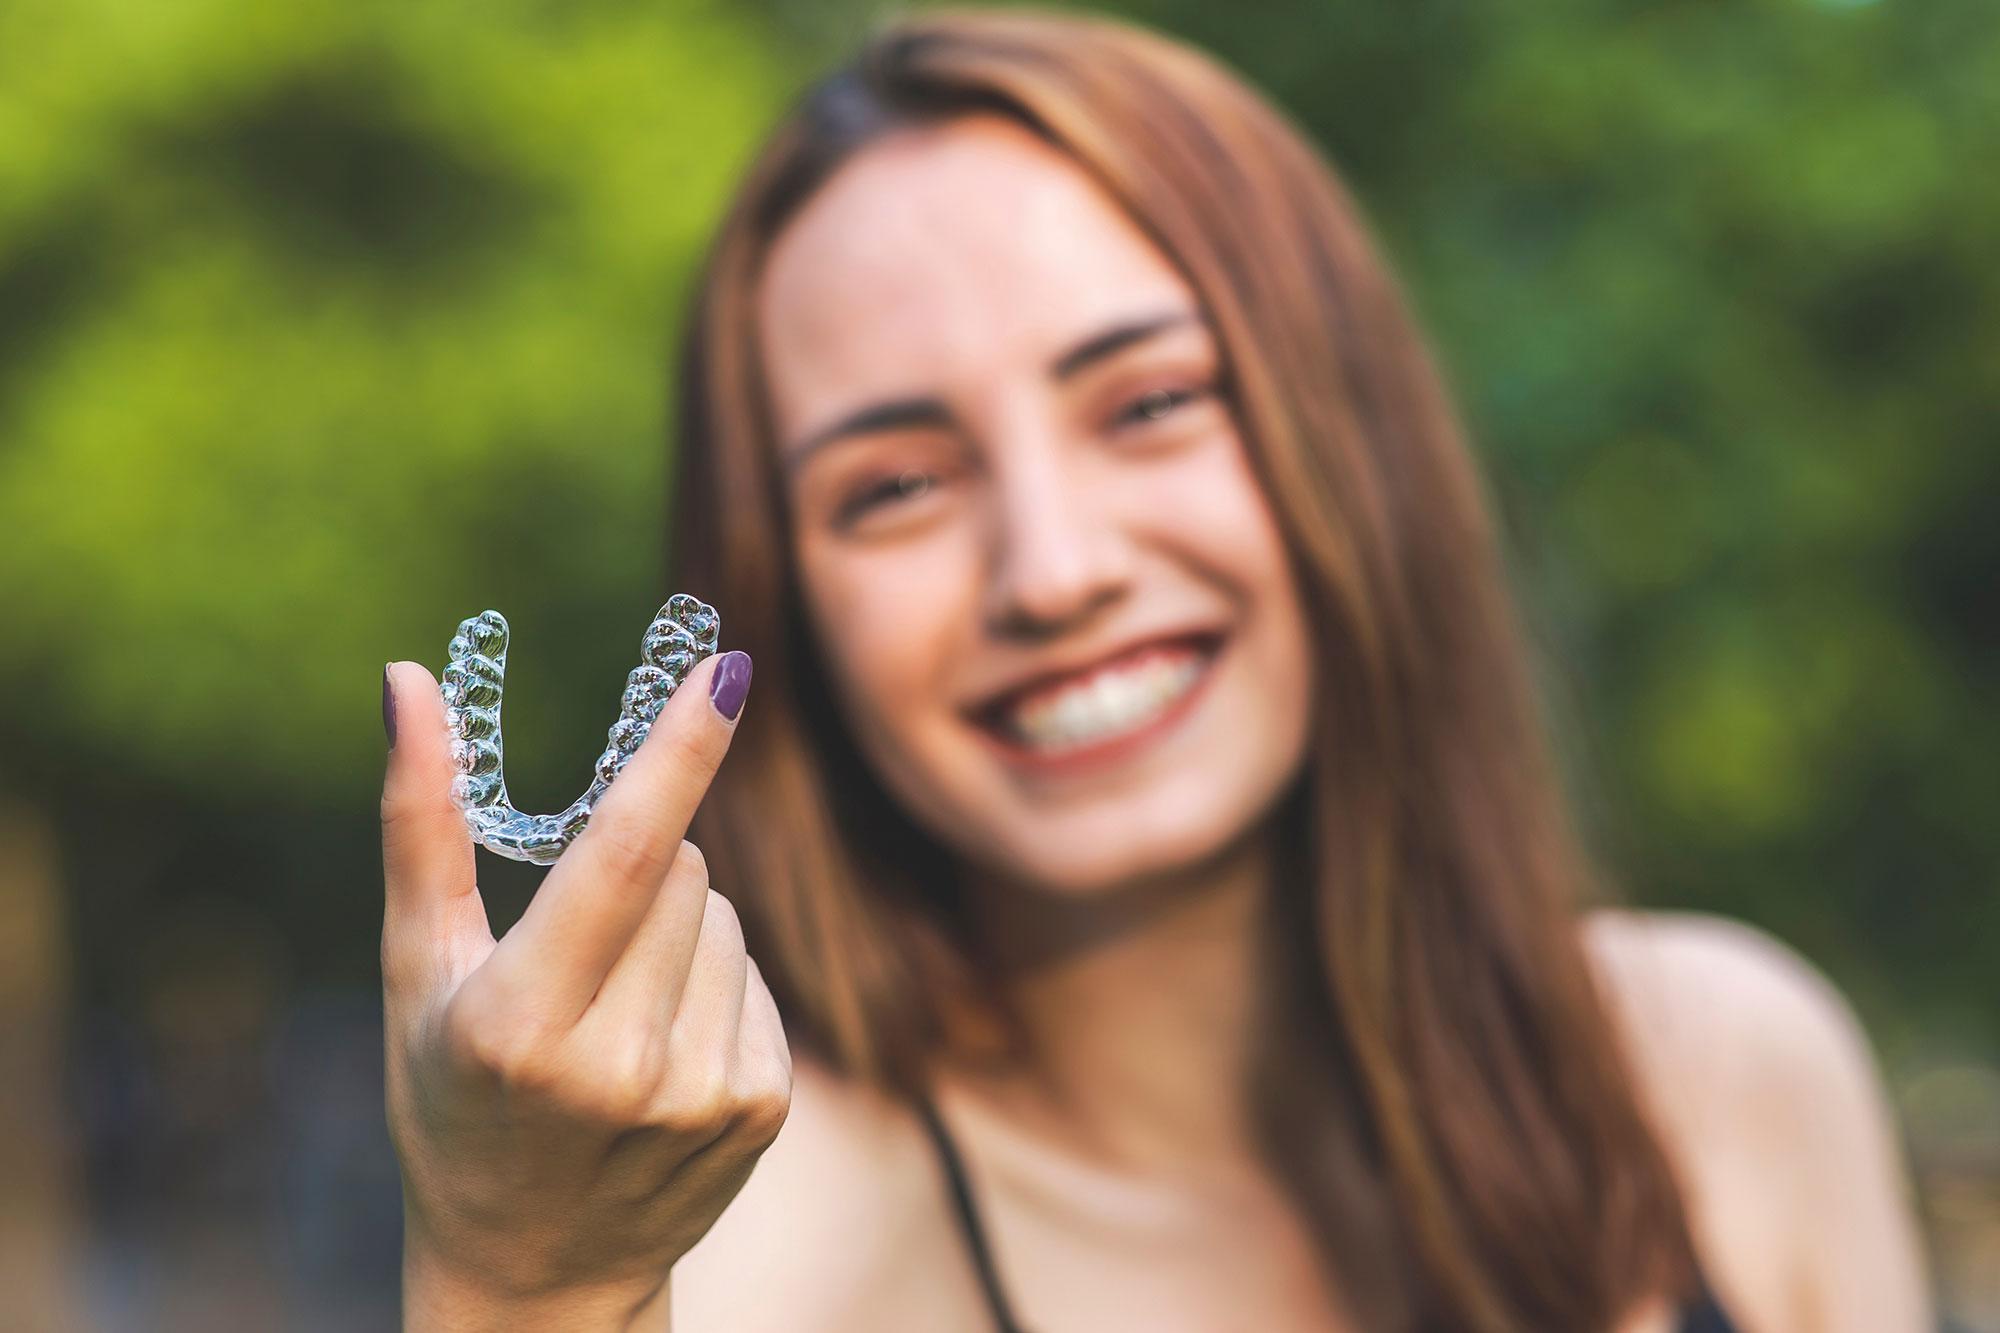 Transform Your Smile with Invisalign® Clear Aligners